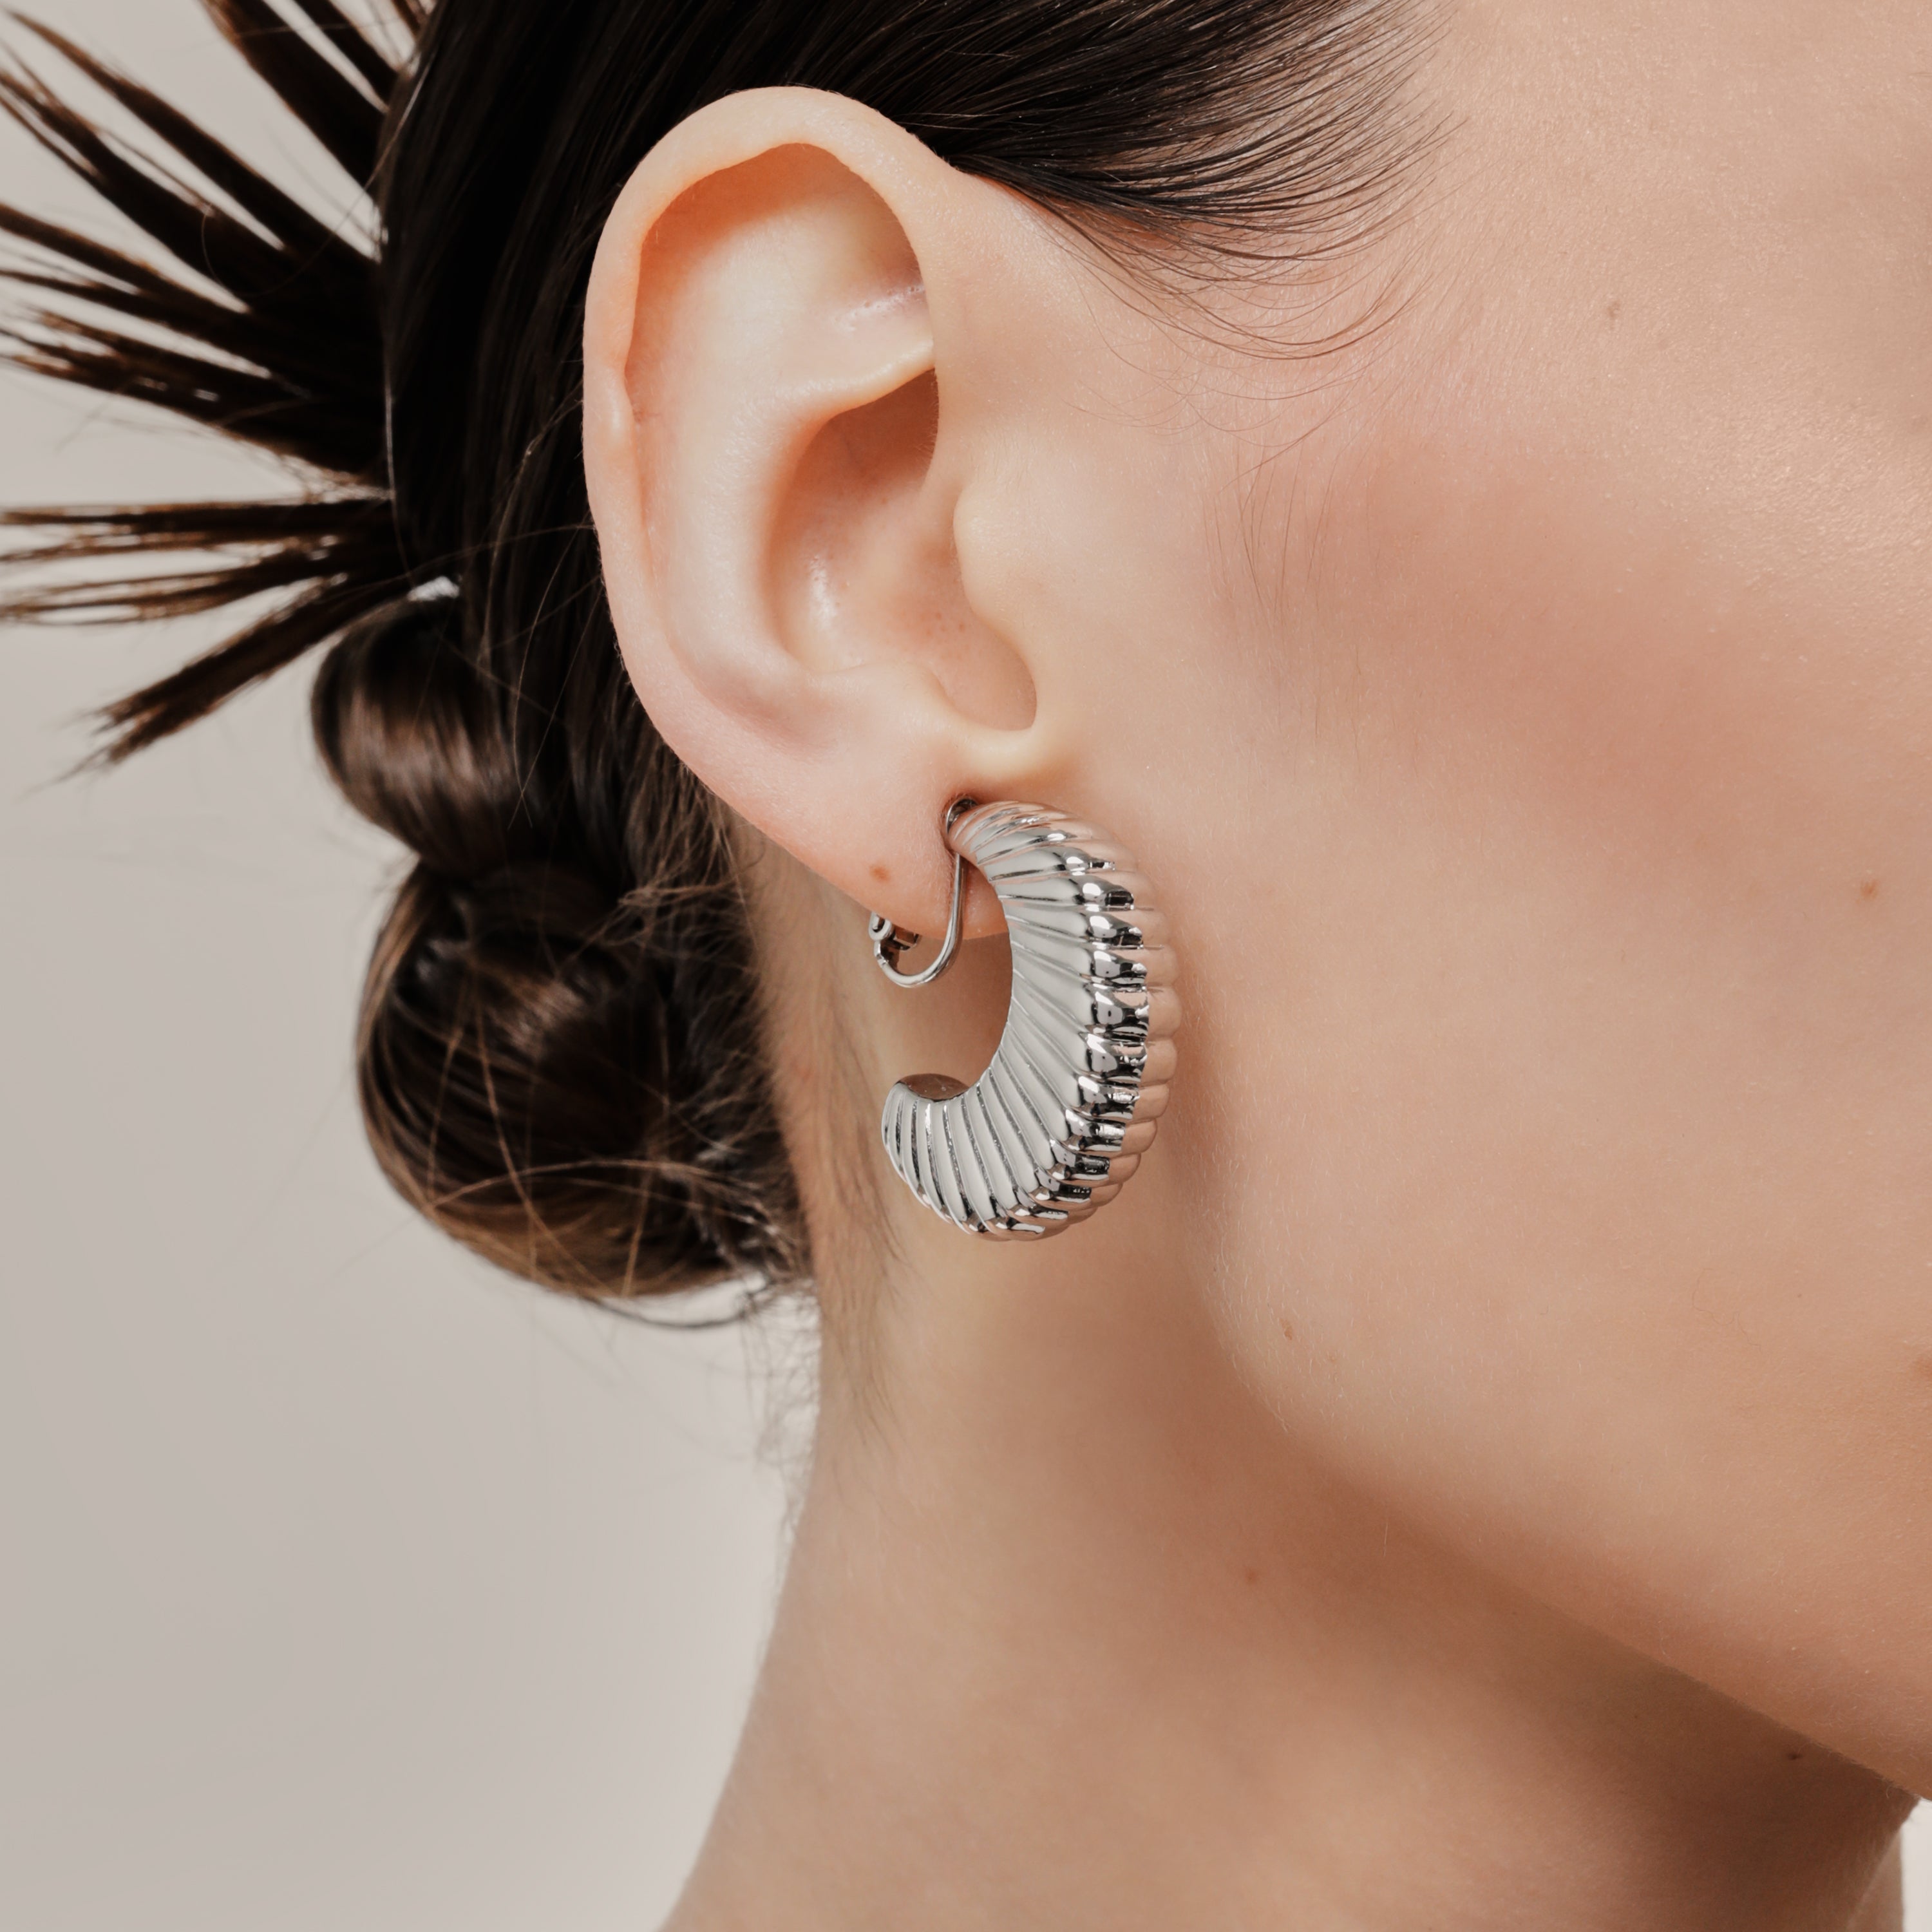 A model wearing the Deco Hoop Clip On Earrings in Silver. Designed with a screwback closure, these earrings provide a secure hold for all types of ears. Whether you have thick, sensitive, small, or keloid prone ears, these earrings can be manually adjusted to fit your size. Enjoy 8-12 hours of wear in these elegant, versatile earrings.